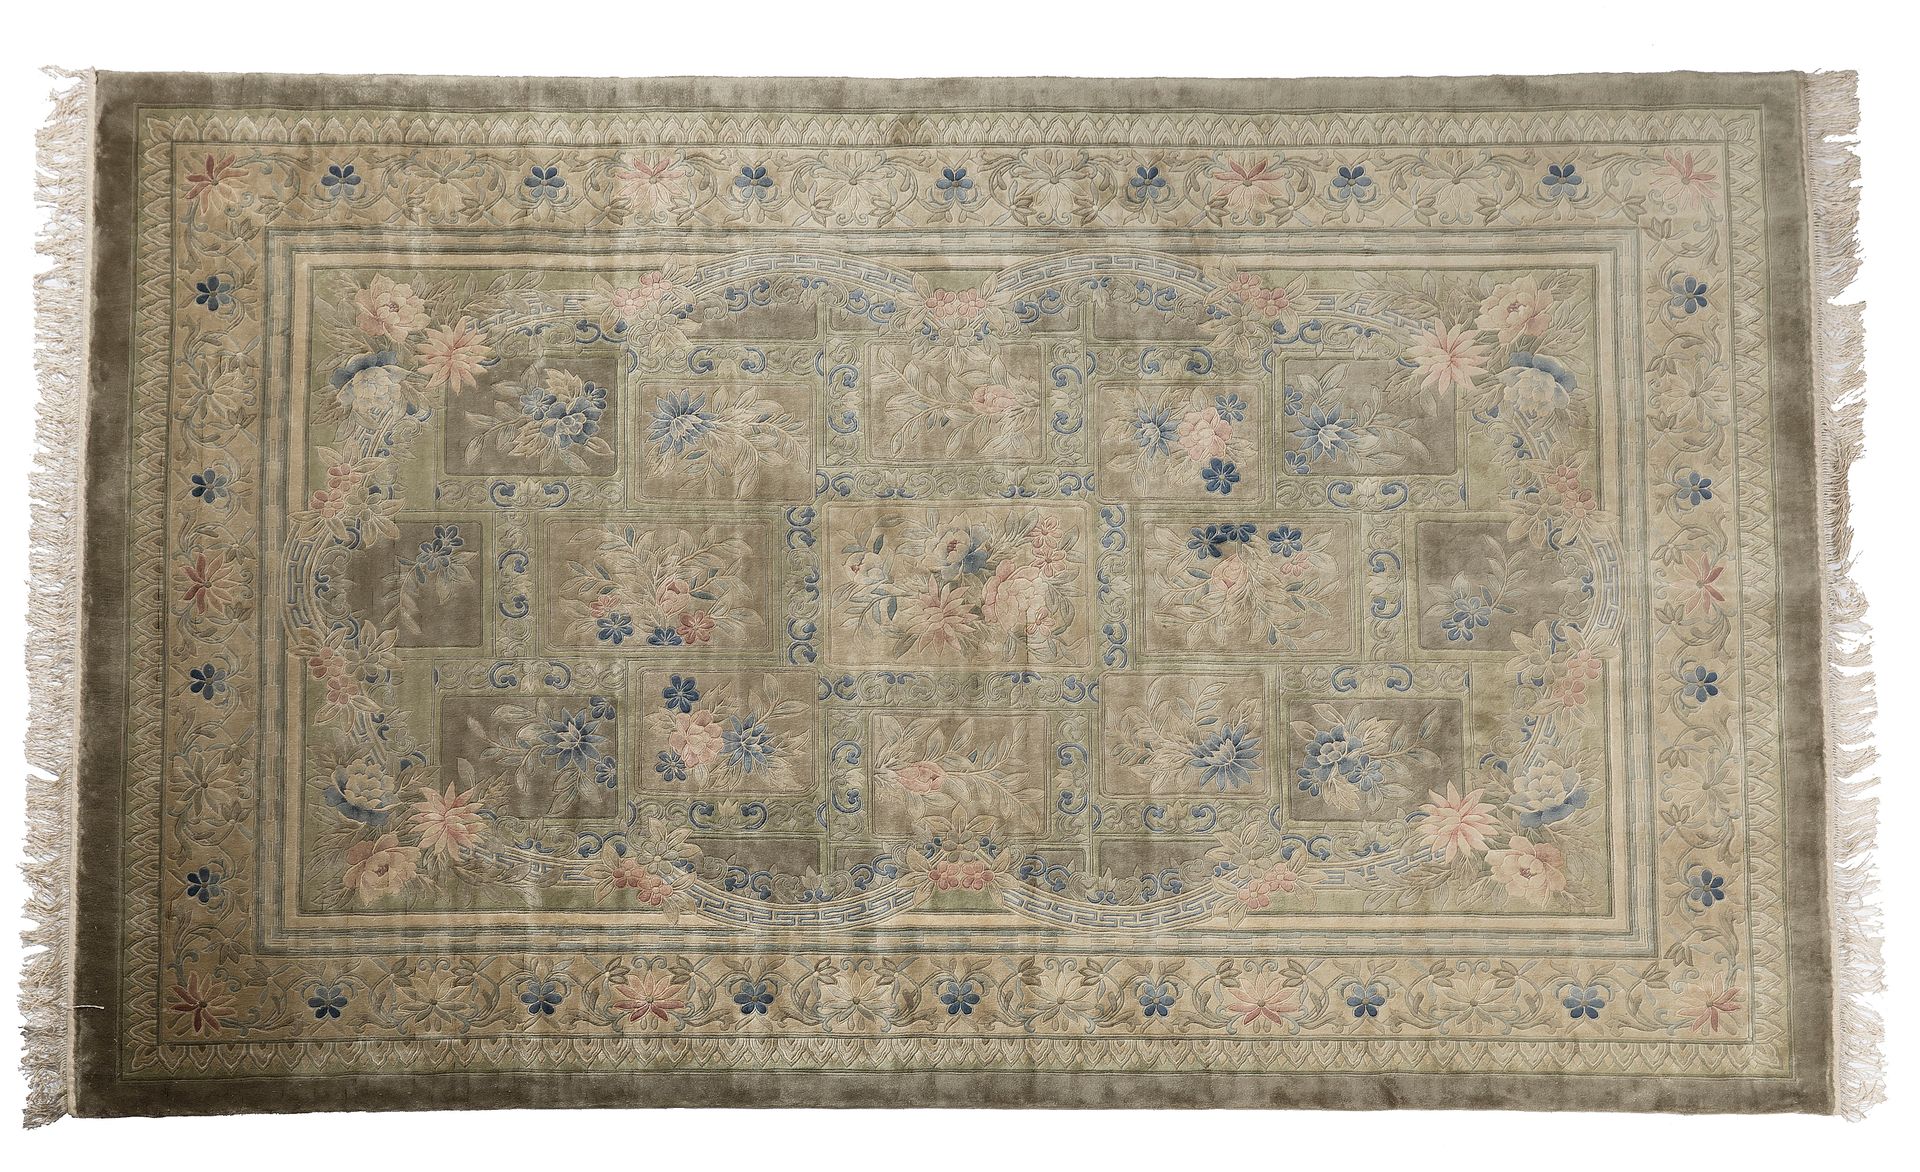 Null Chiseled CHINESE carpet (China), mid 20th century

Dimensions : 308 x 200cm&hellip;